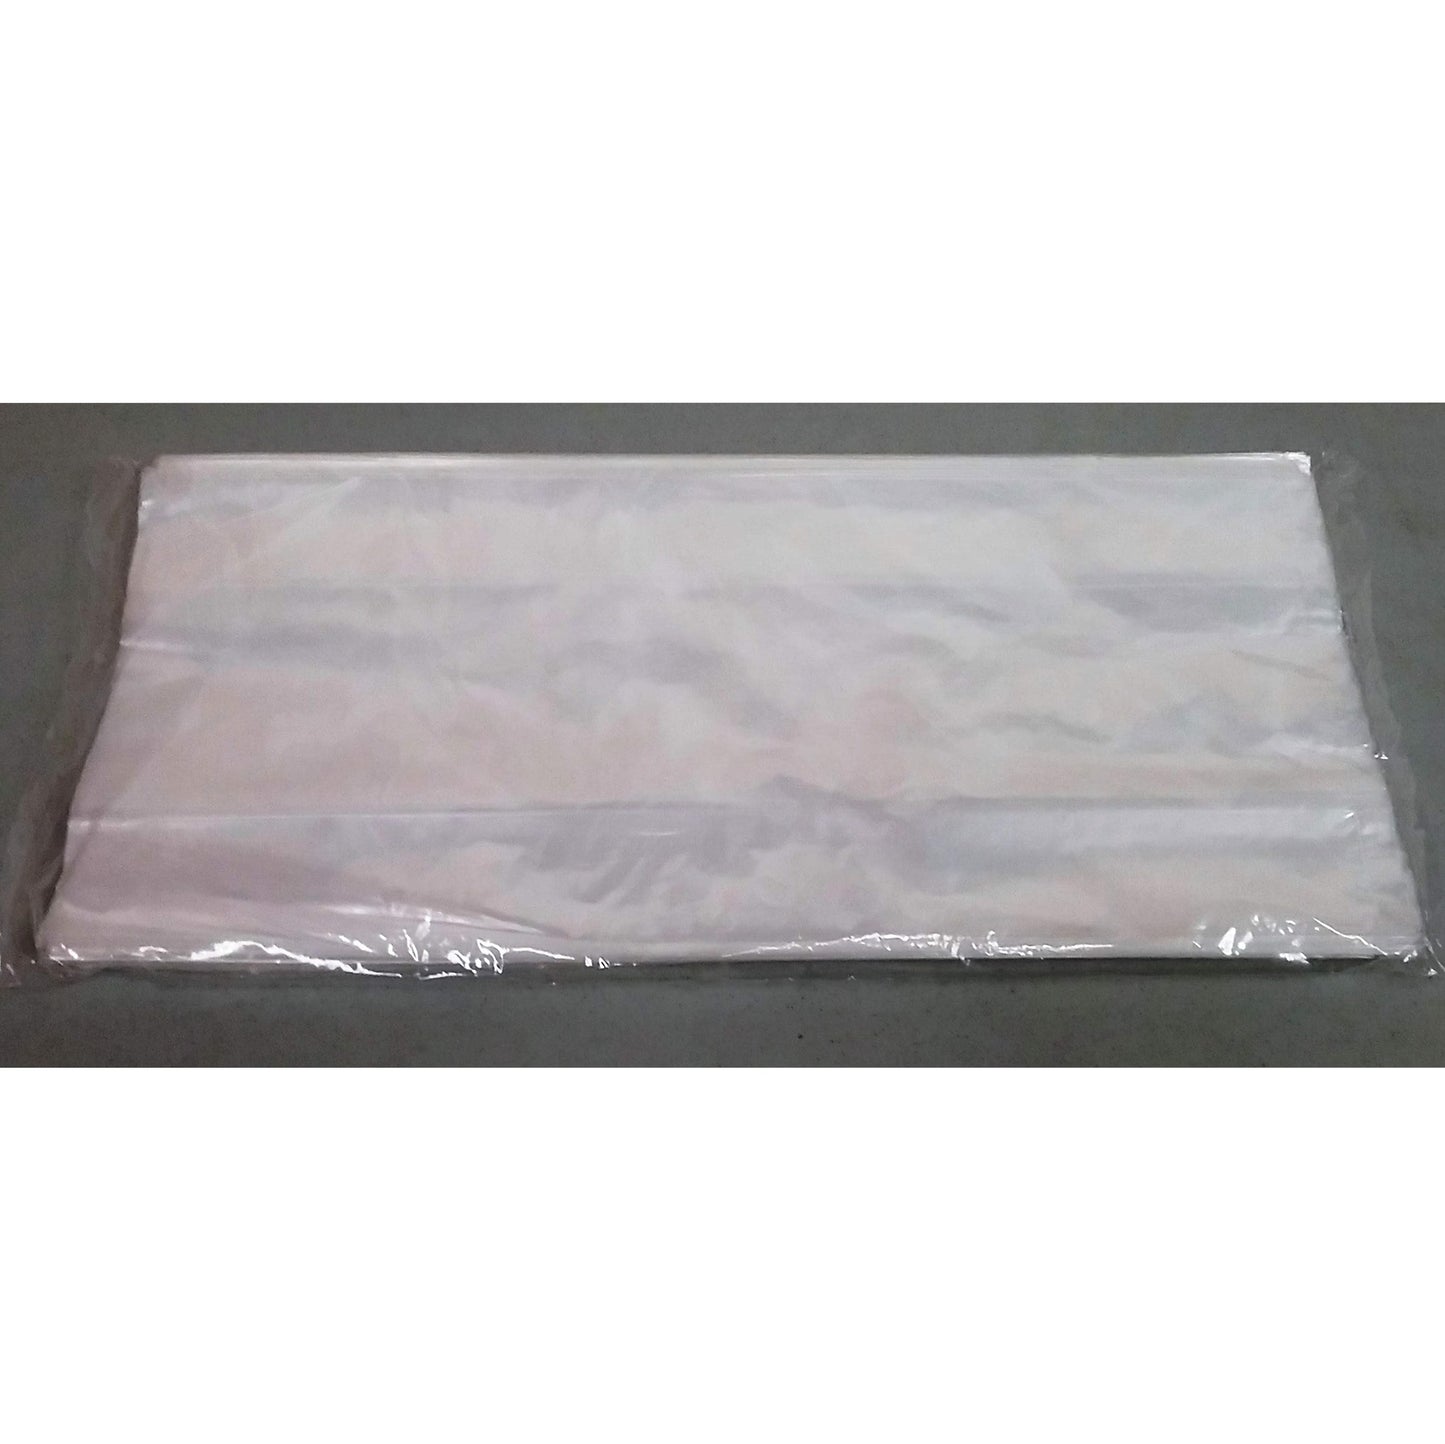 A pack of clear bread bags, dimensions 8 x 4 x 18 inches, in 1 mil thickness. The reflection on the plastic wrap indicates the smooth and glossy texture of the bags.